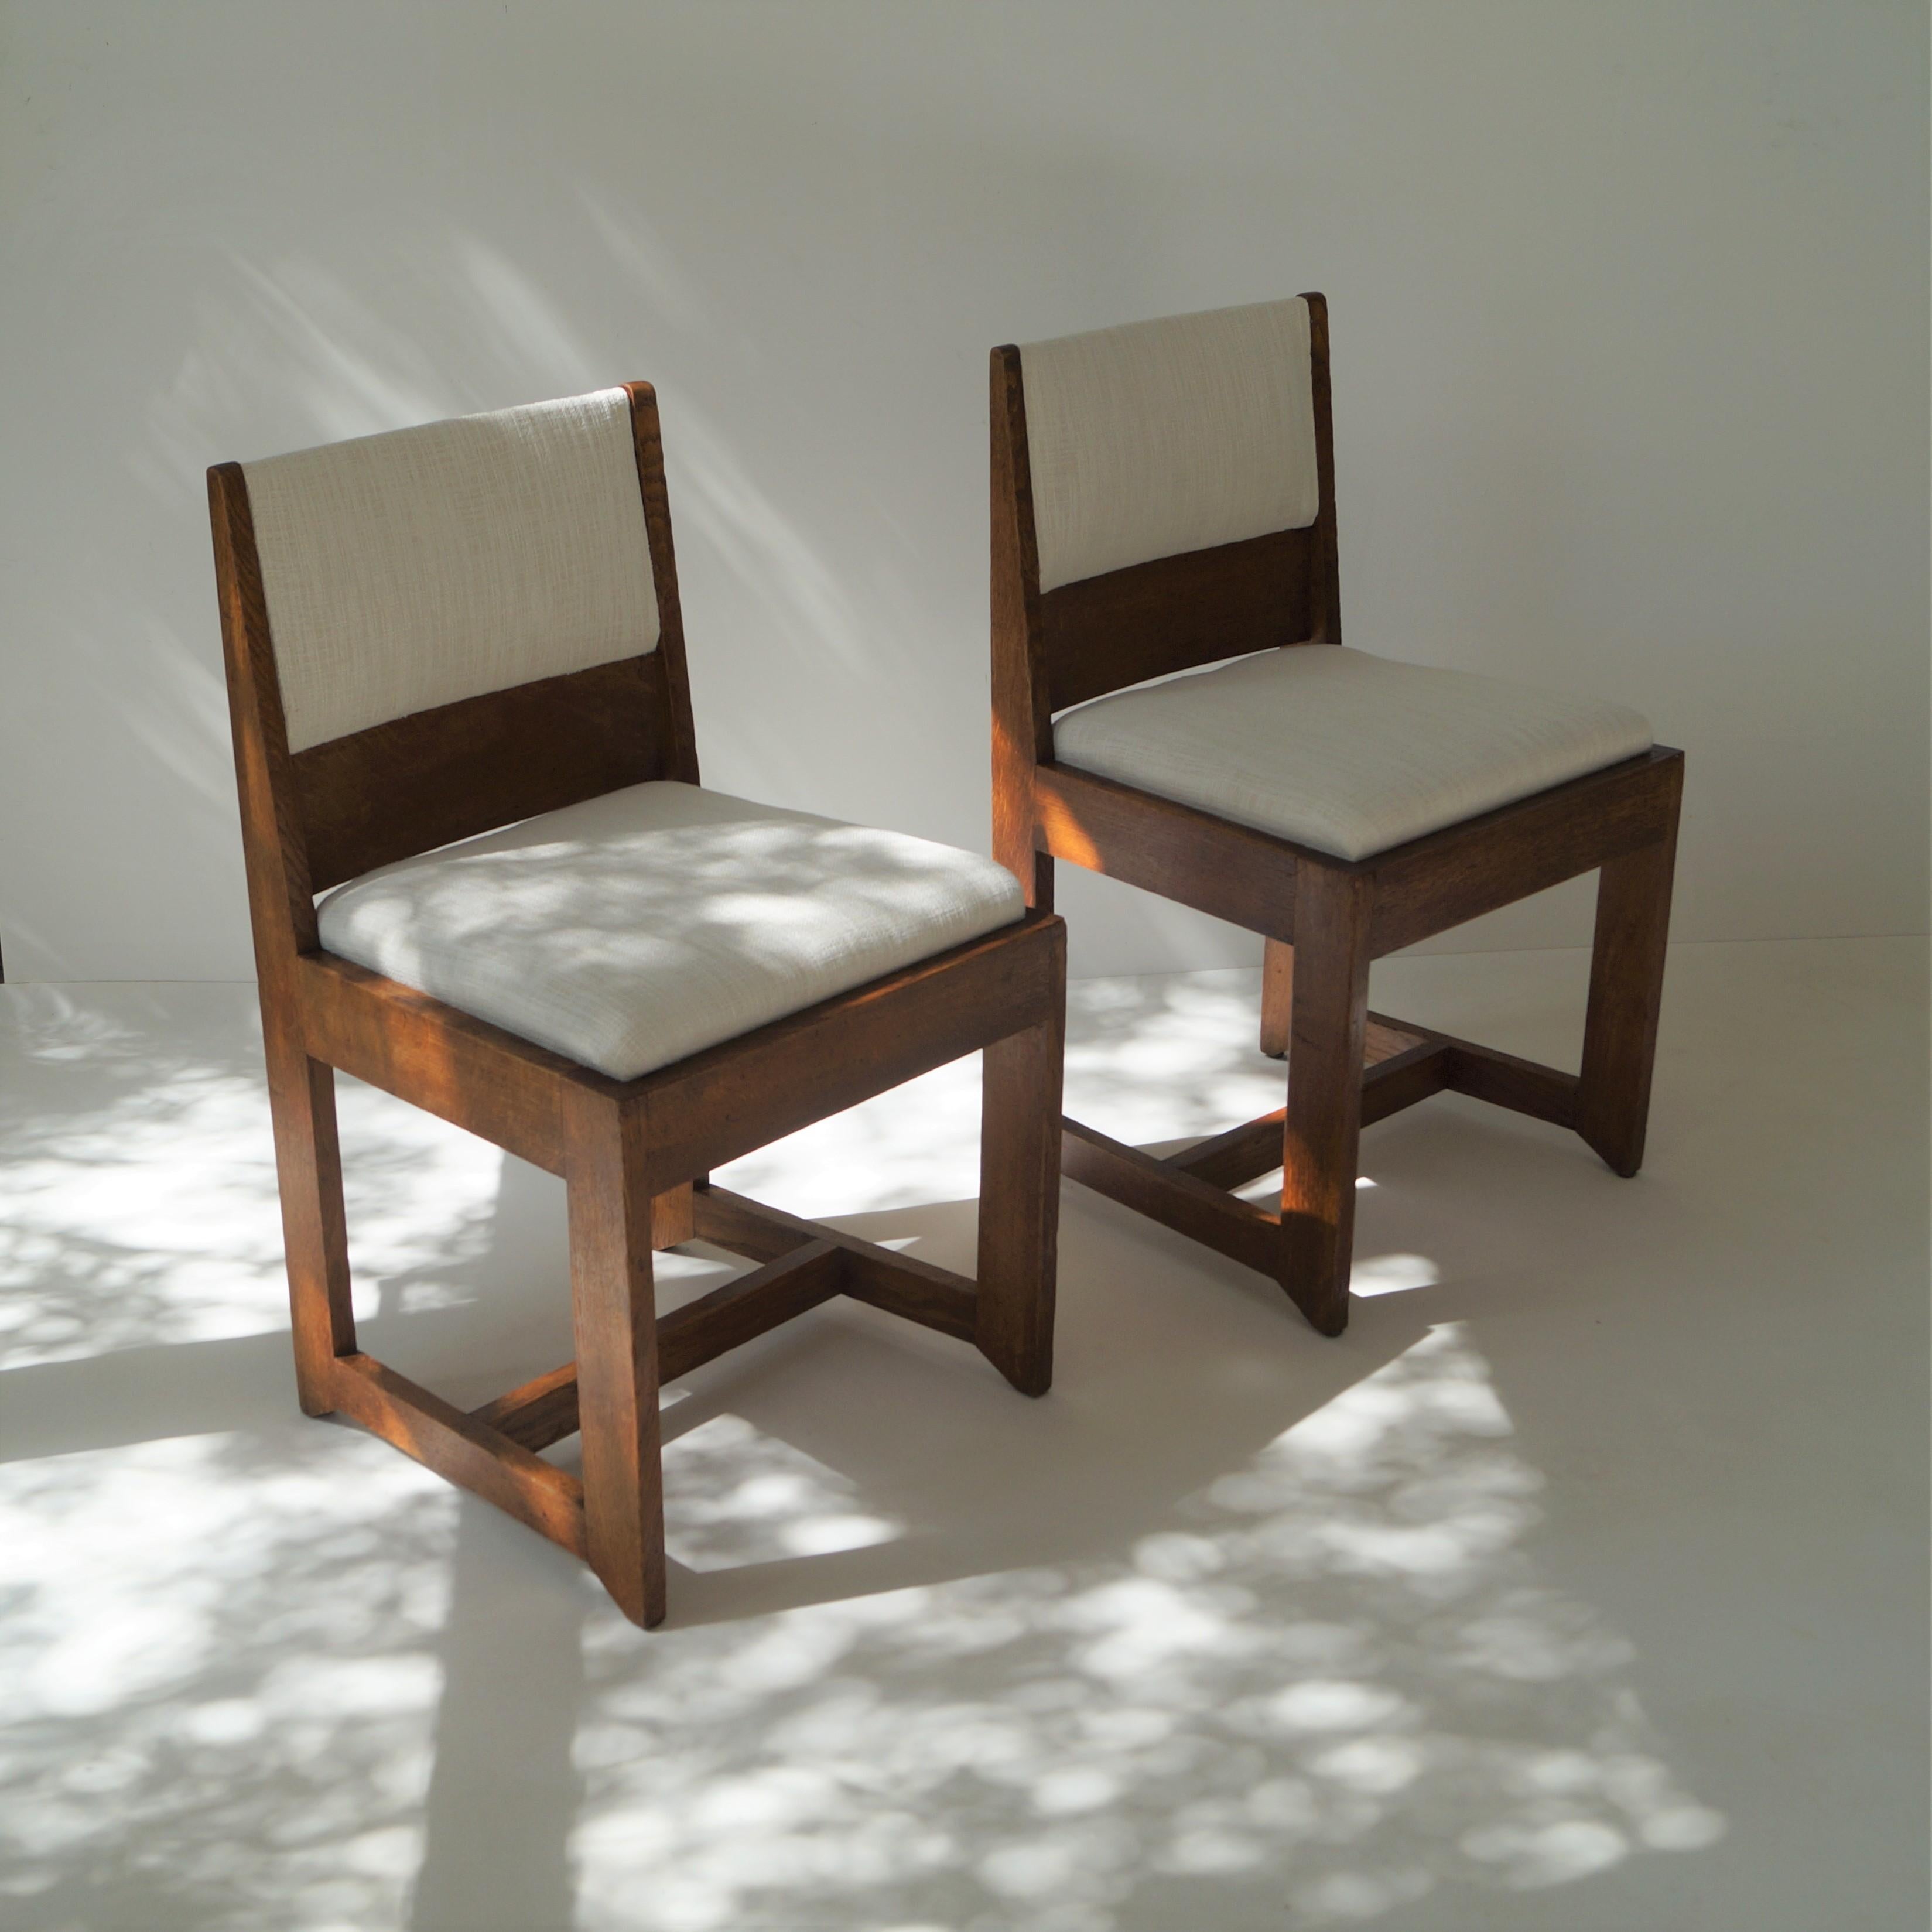 Dutch Art Deco Modernist set of chairs by H. Wouda for Pander, 1924 For Sale 2